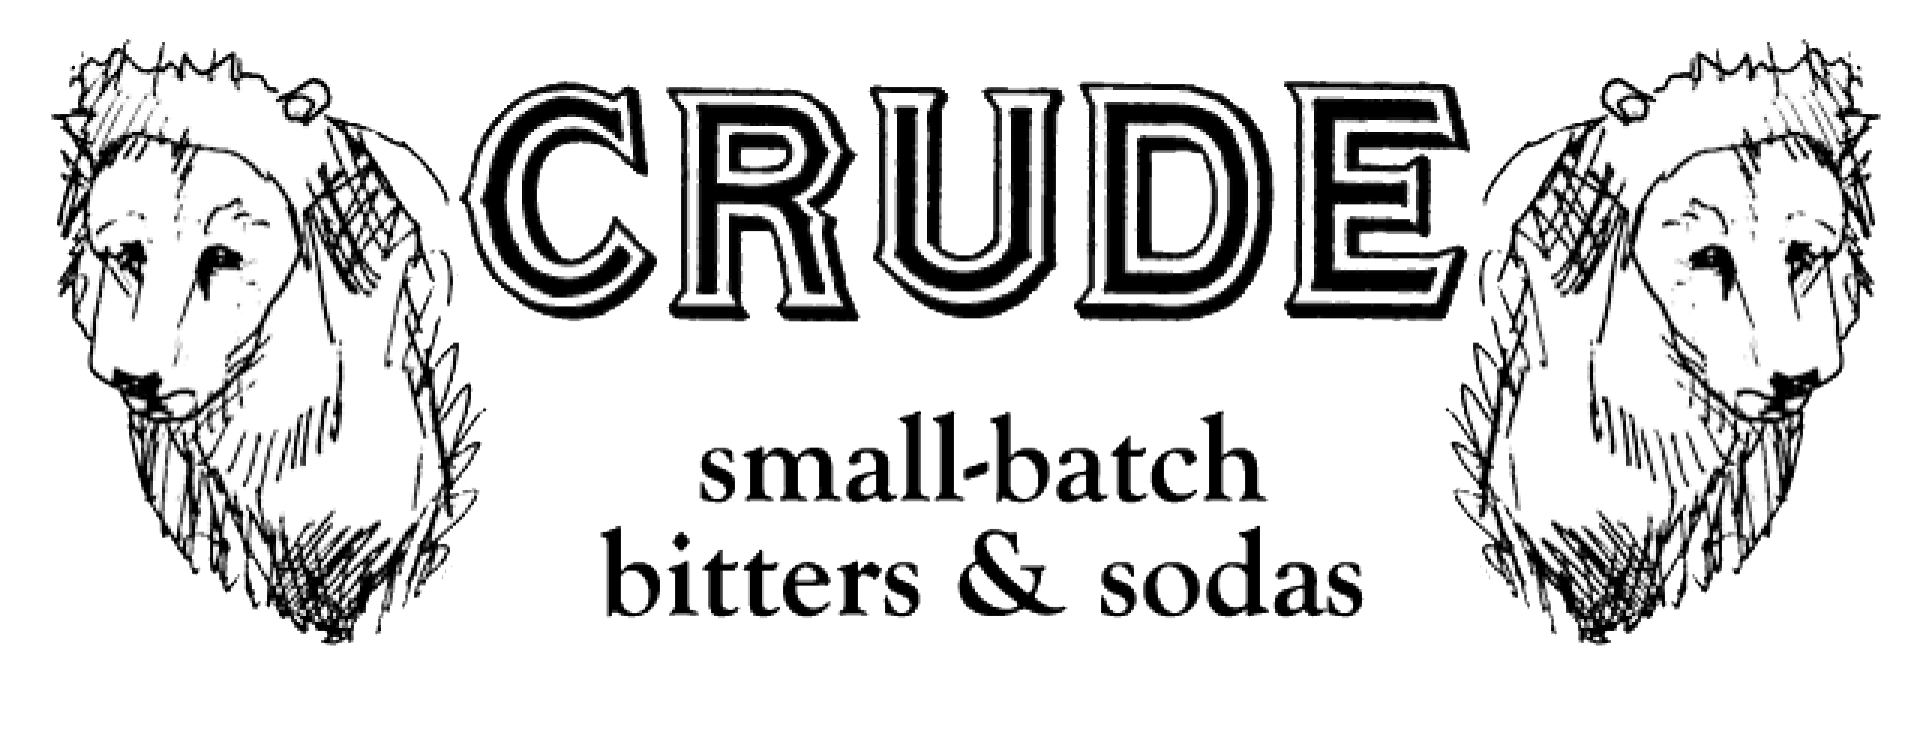 Crude Bitters and Sodas